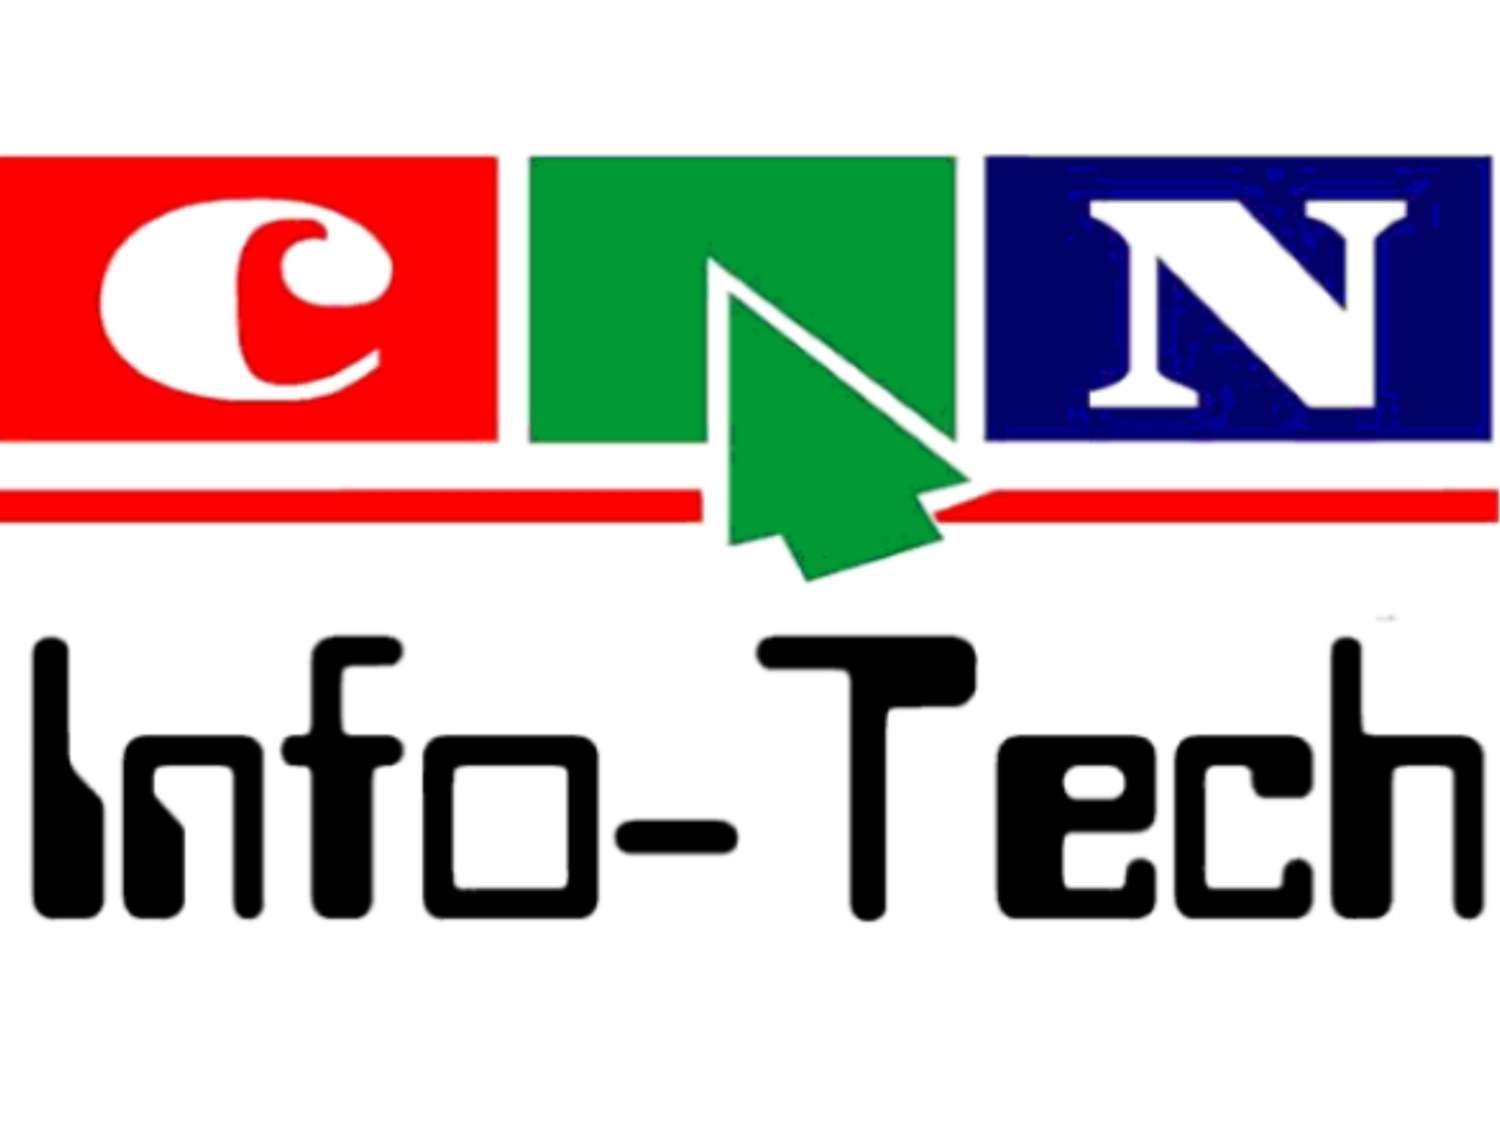 CAN Infotech Exhibition to Be Held from Feb 7